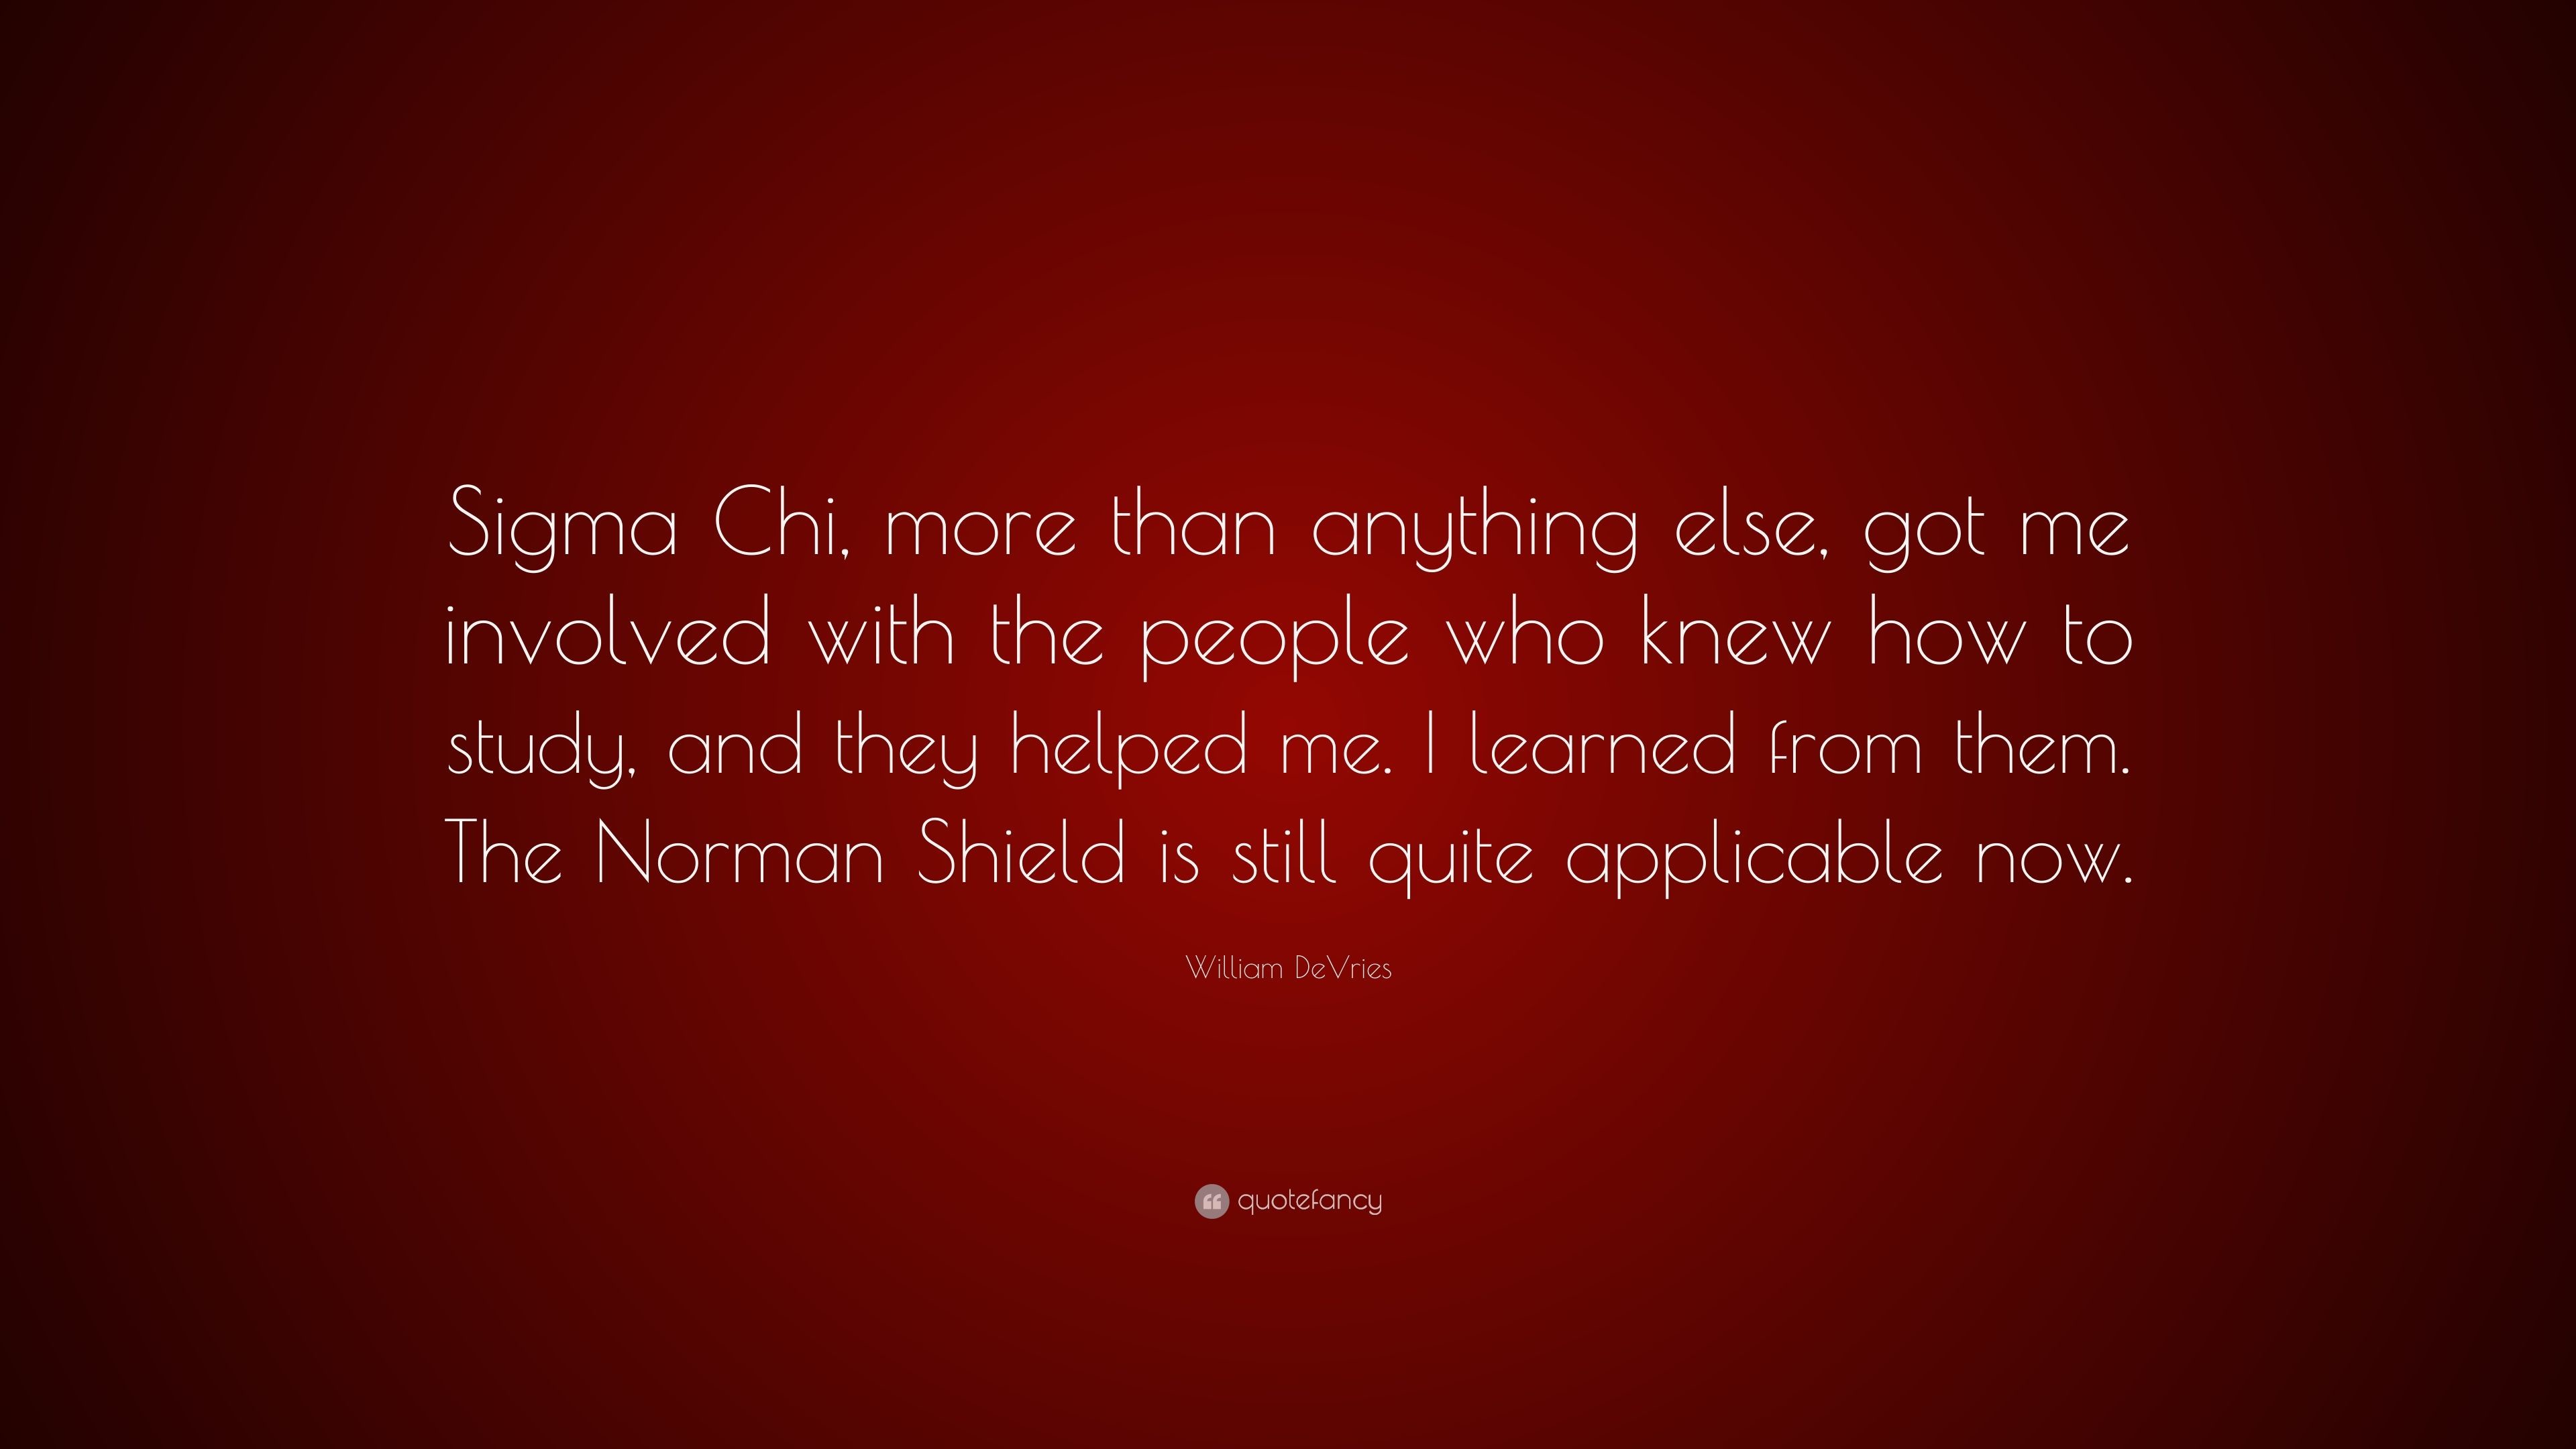 3840x2160 William DeVries Quote: “Sigma Chi, more than anything else, got me involved